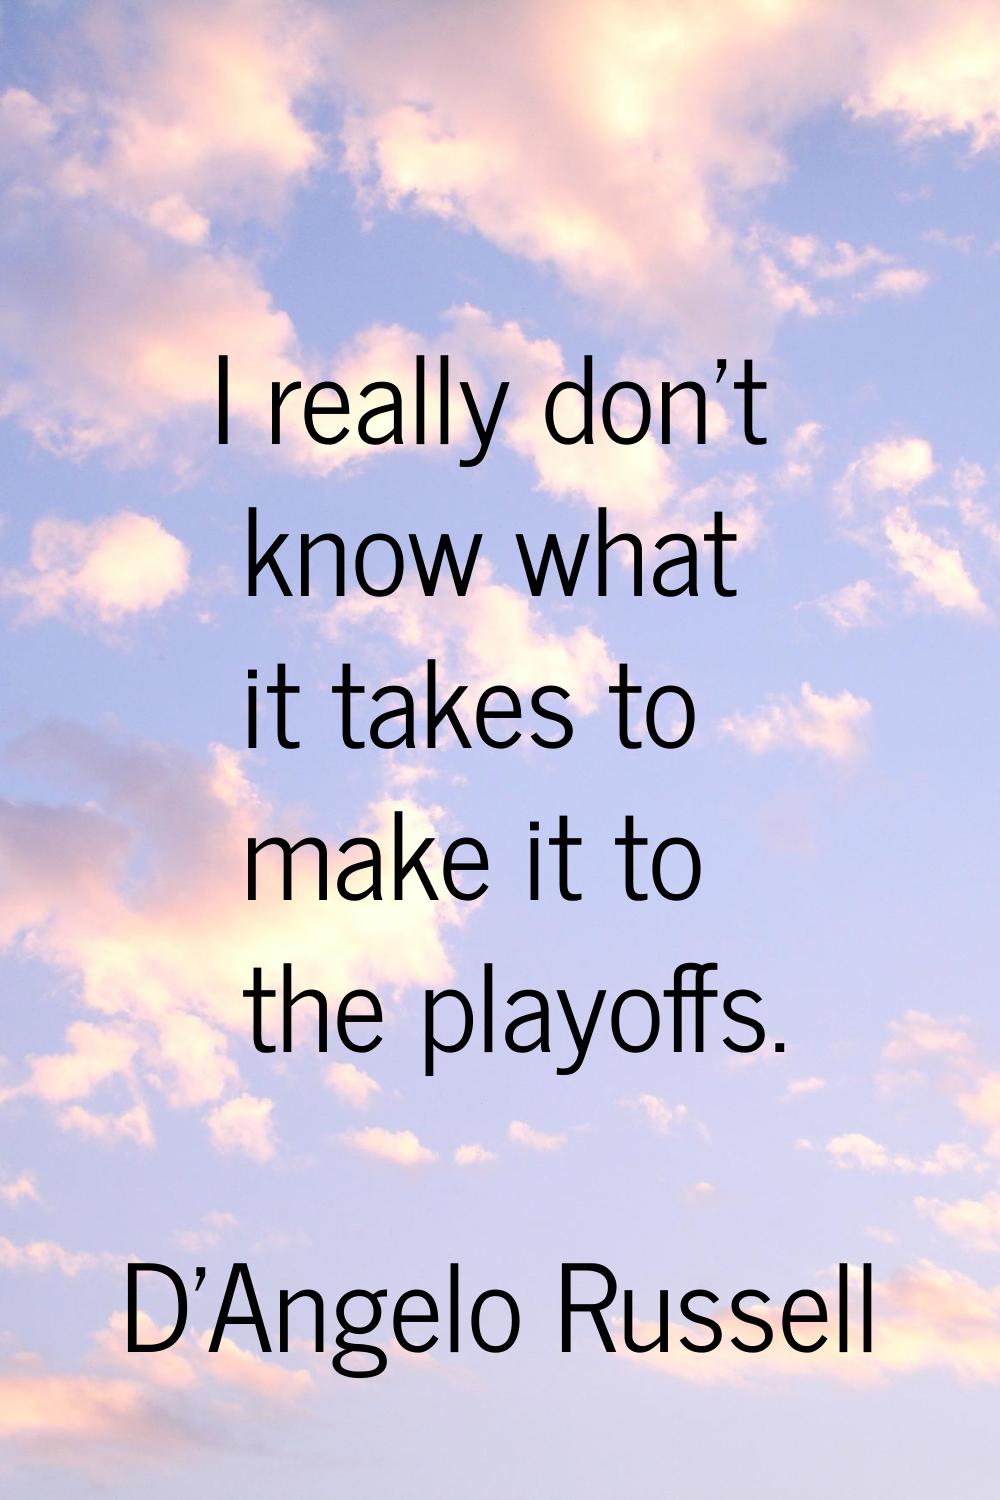 I really don't know what it takes to make it to the playoffs.